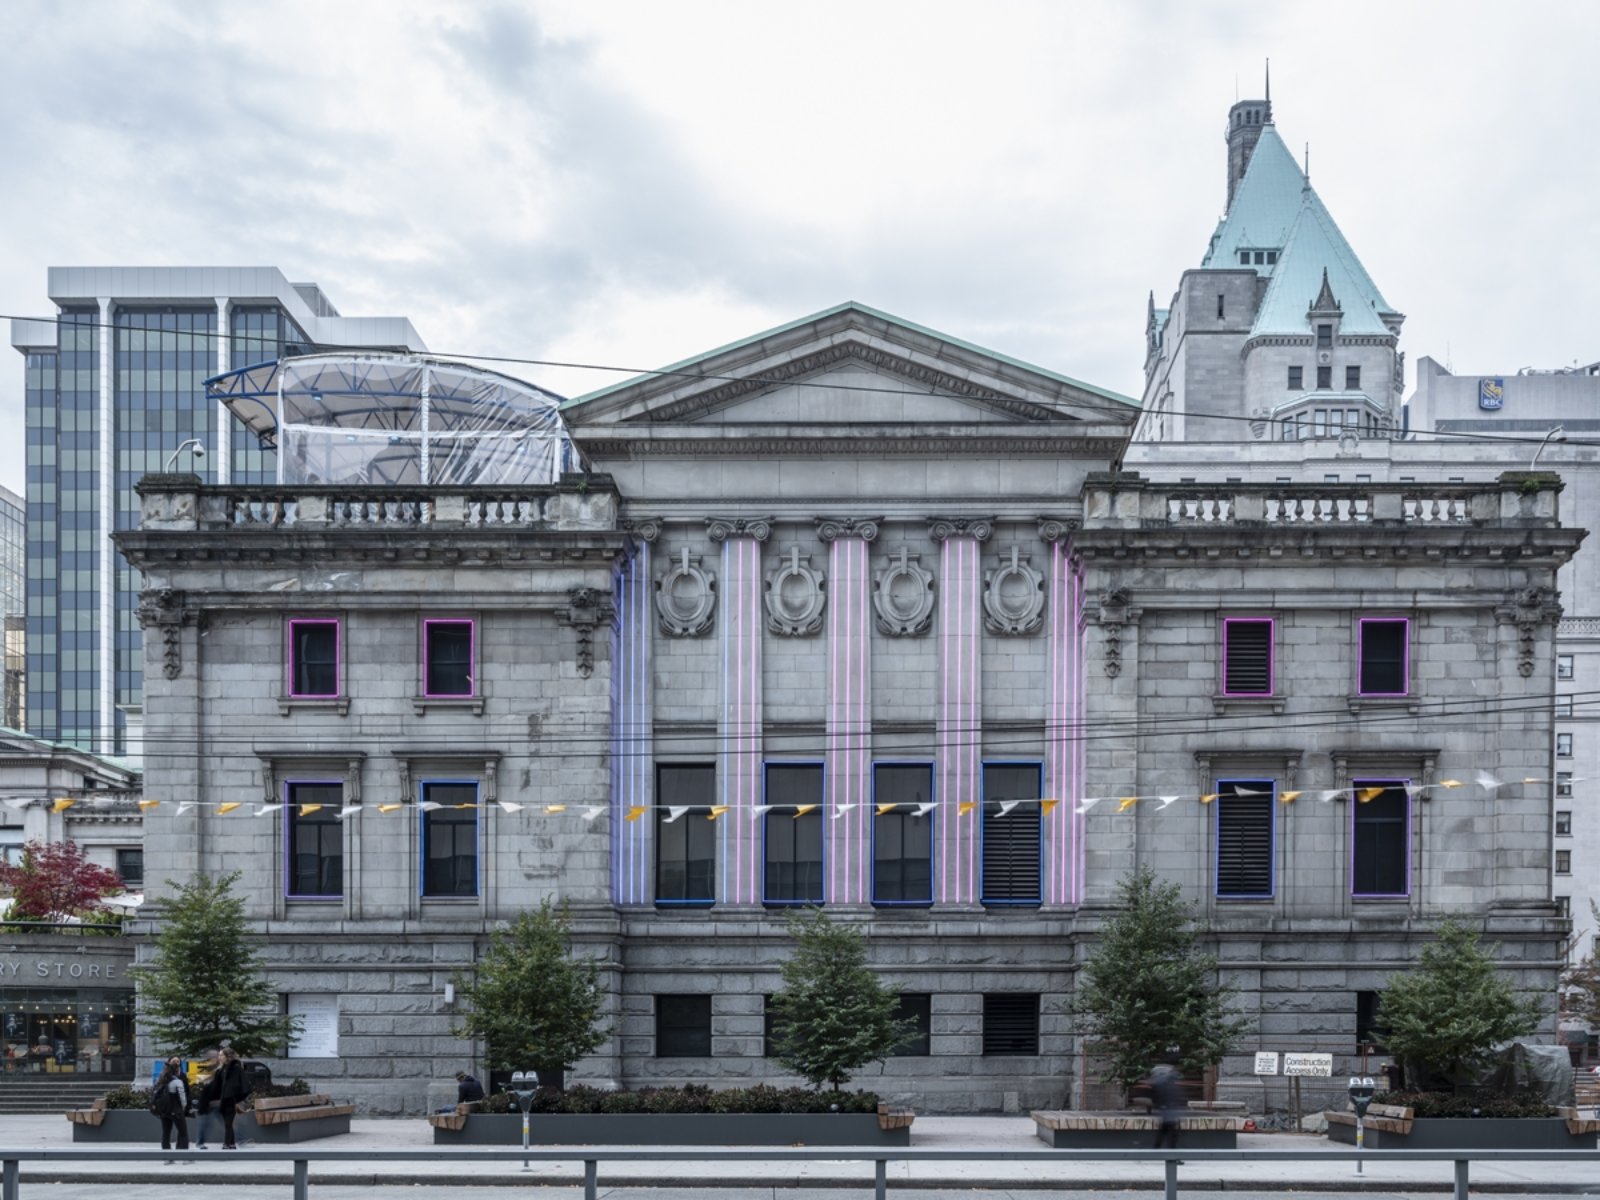 Kevin Schmidt, RGB Beg Cycle, 2018, styrofoam model of vancouver art gallery with led lights, dmx controllers, customized recording software, midi keyboards, electronics, computer, audio broadcast over radio, led lighting on exterior of gallery, dimensions variable. Installation view, We Are the Robots, Vancouver Art Gallery, Vancouver, 2018